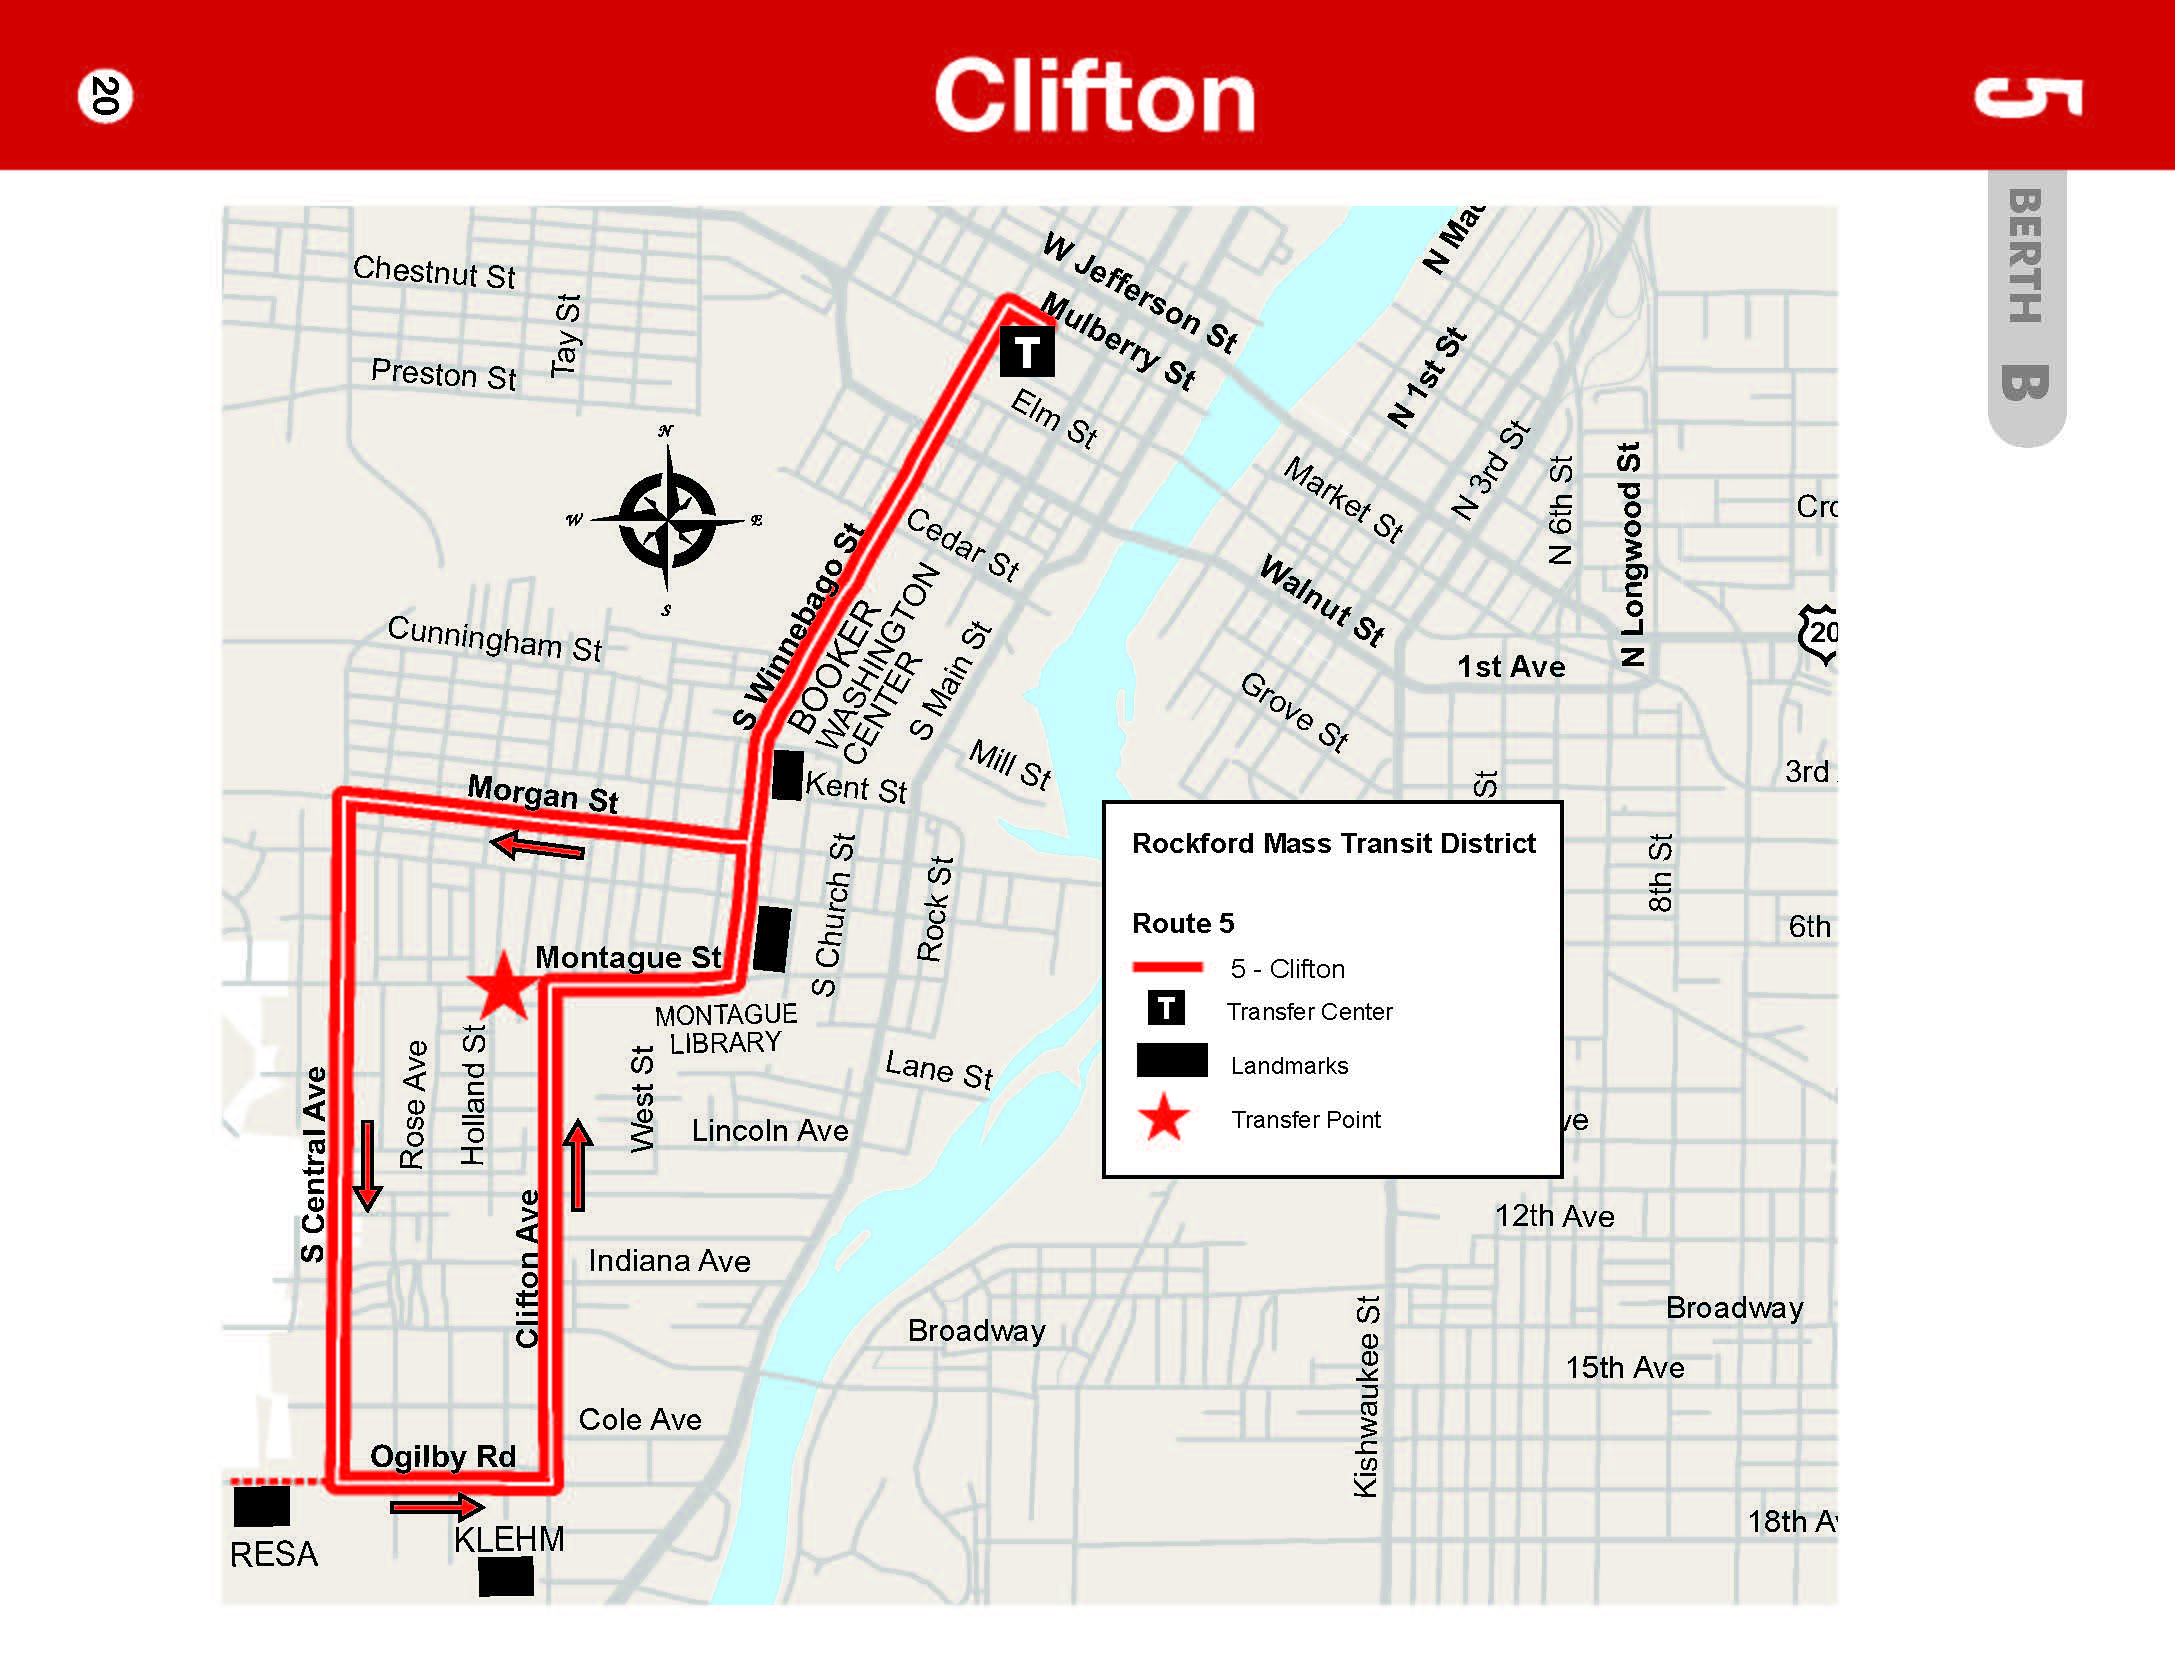 RMTD - Route 5 - Clifton - Map